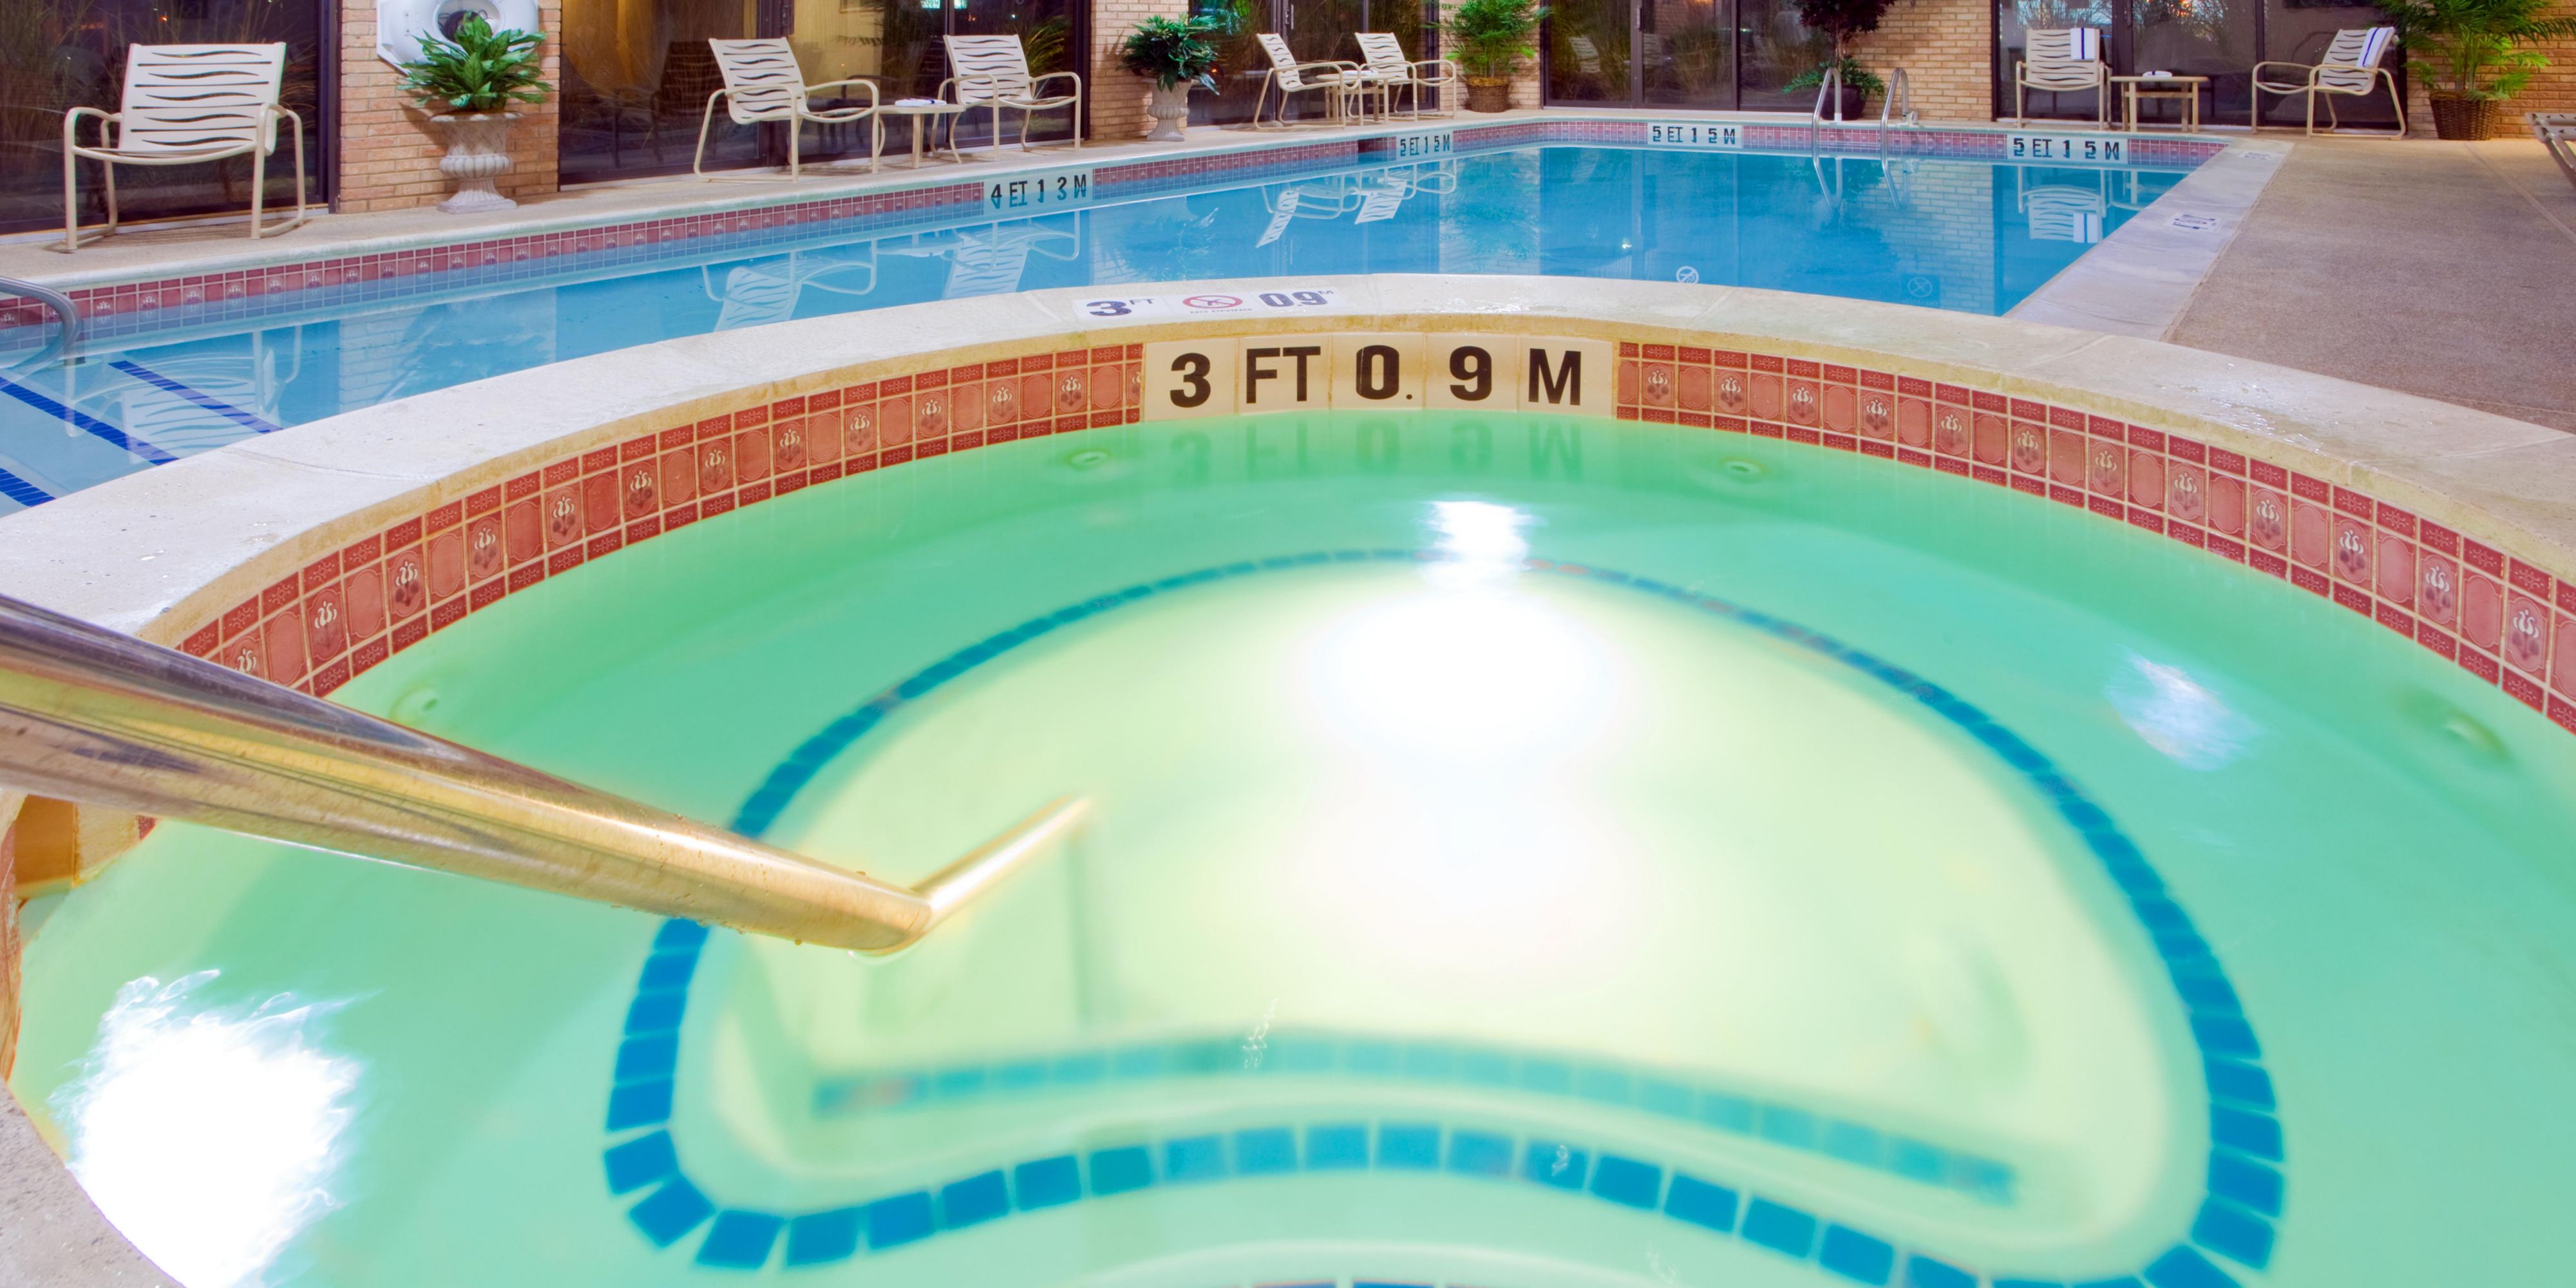 Enjoy our indoor pool & whirlpool during your stay.